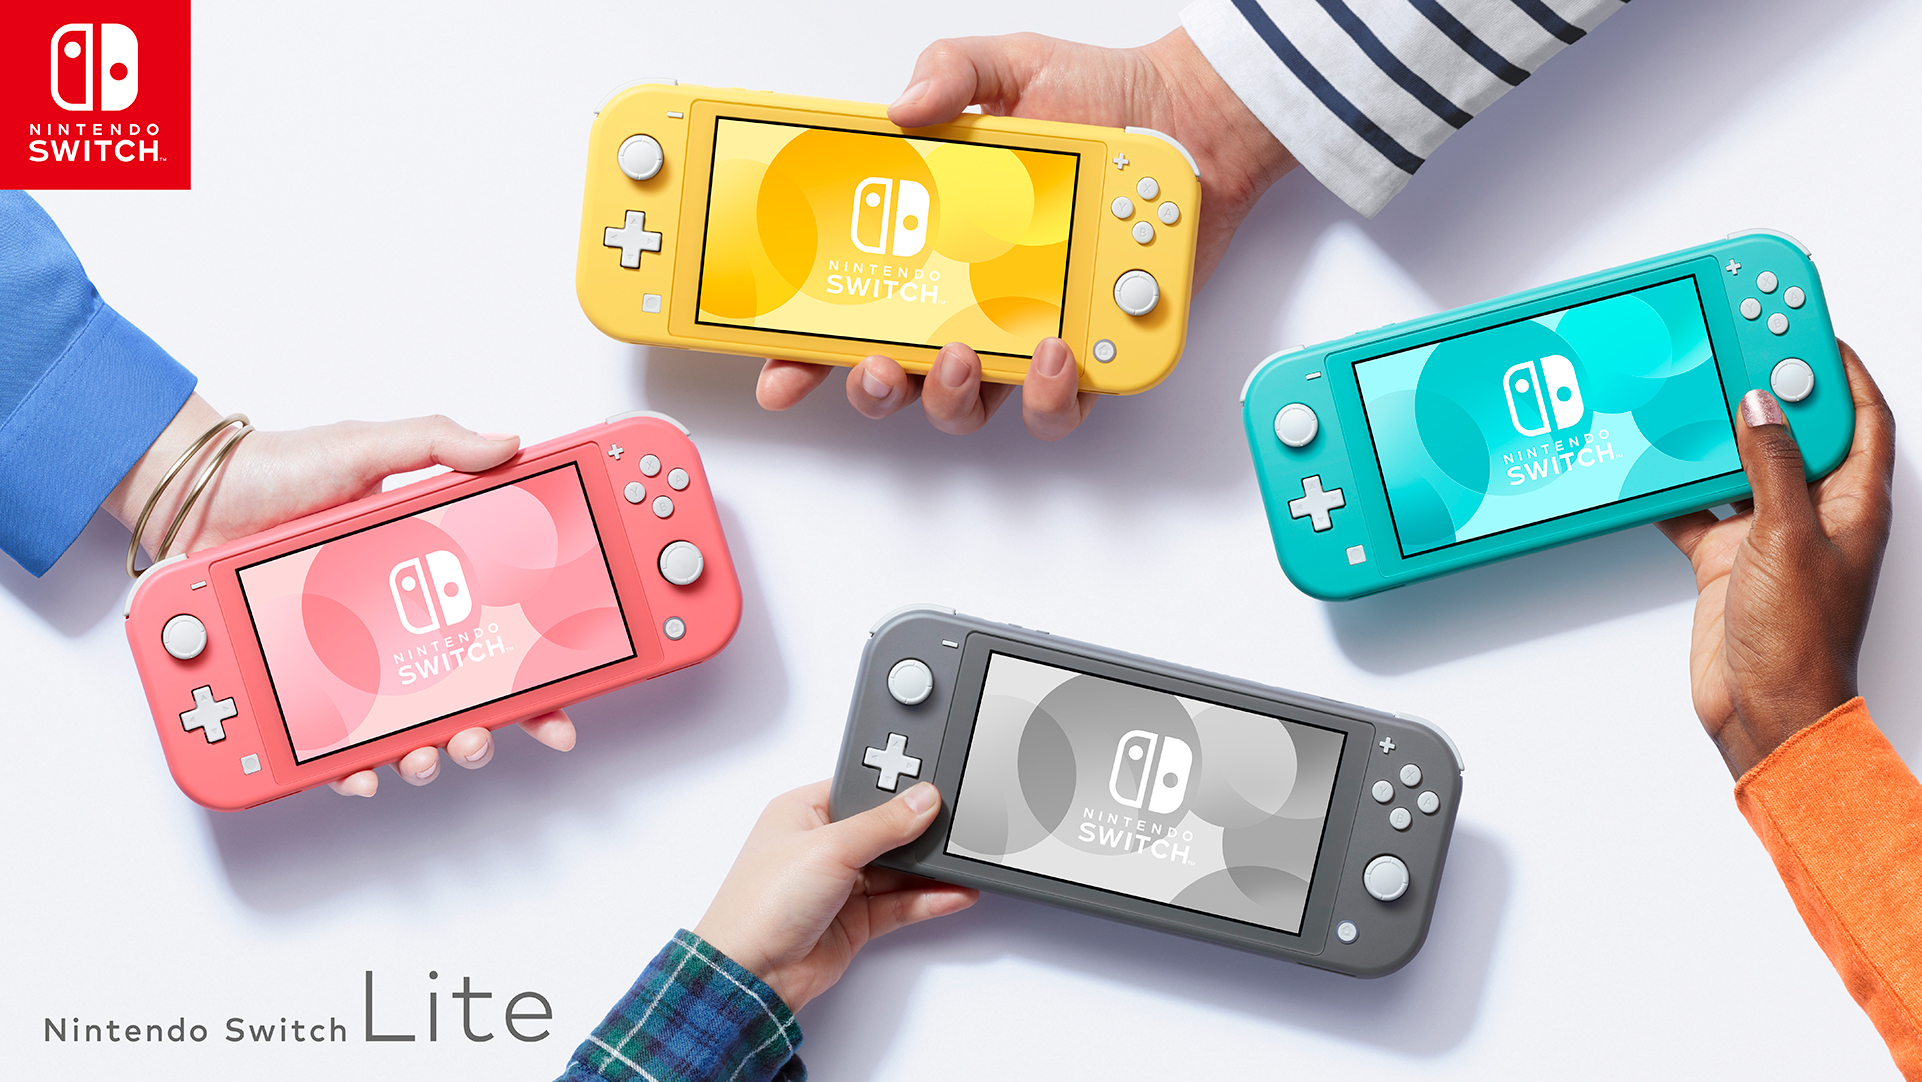 New Nintendo Switch Color Coming Soon, Vibrant Coral Nintendo Switch Lite Revealed | News